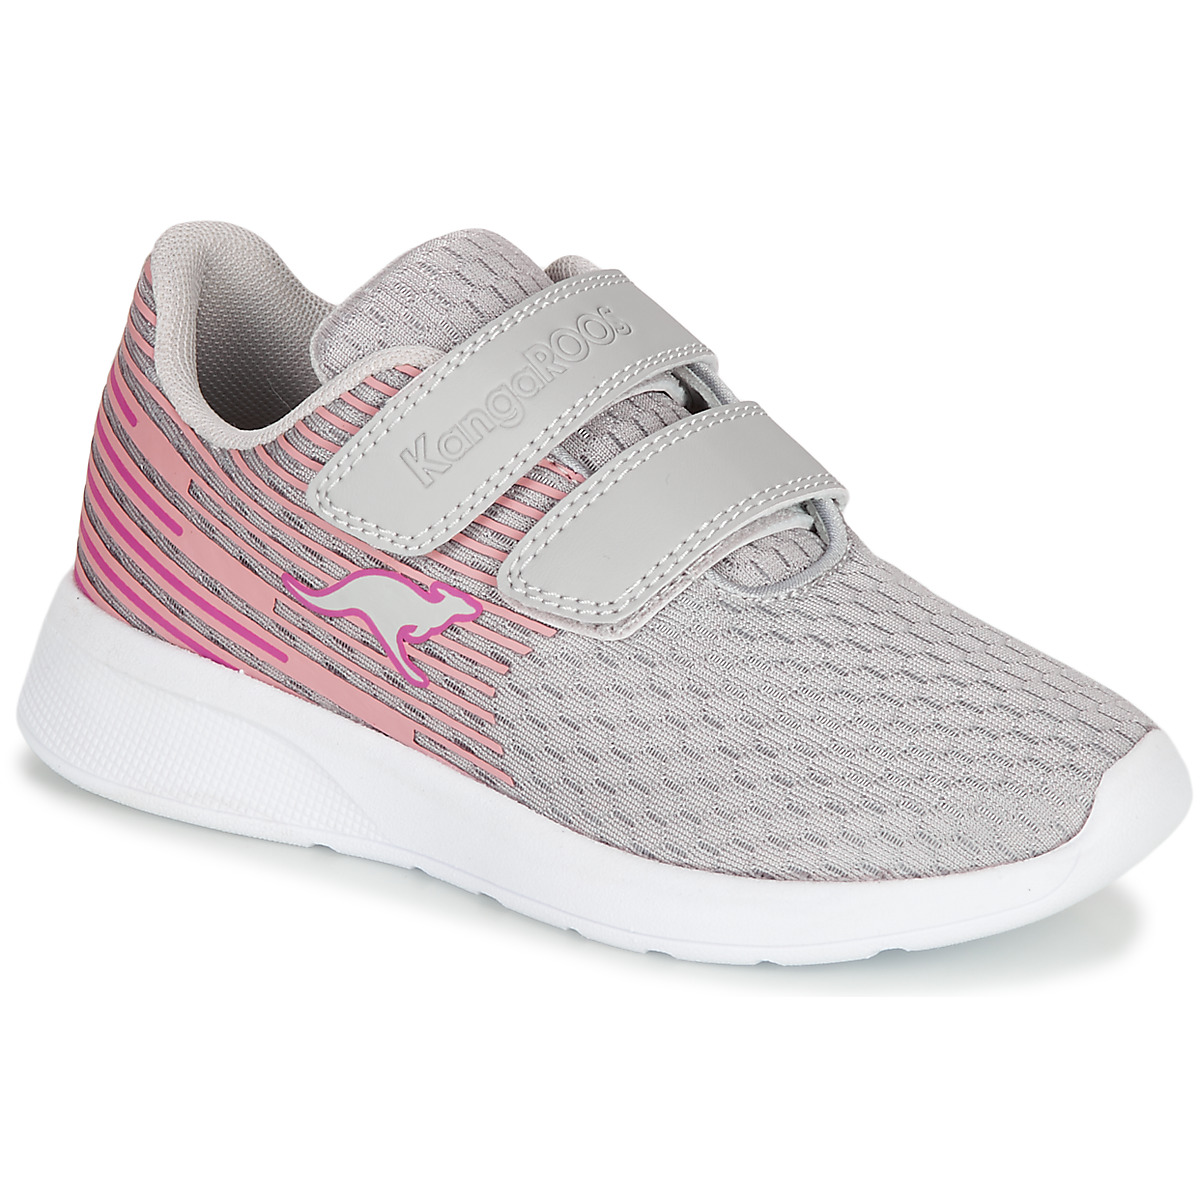 Chaussures Fille Adidas Alphabounce Beyond M White Navy-Bright-Red CG5573 KF ACT V Gris / Rose